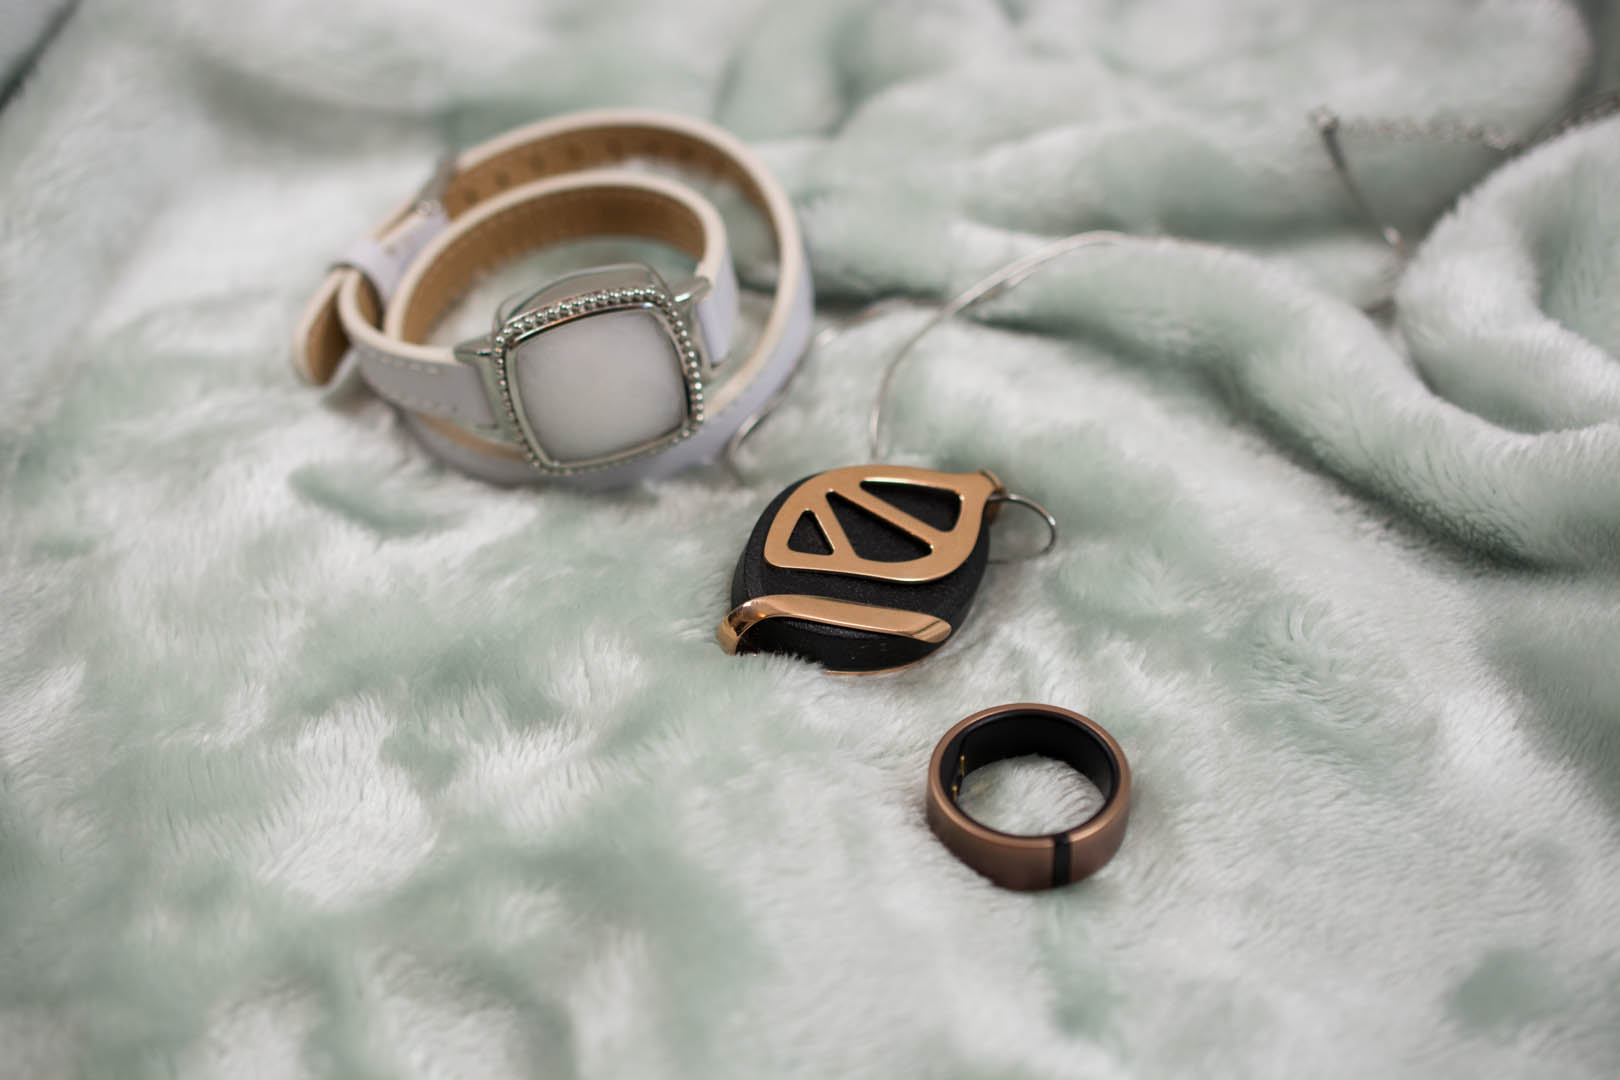 Smart Jewelry And The Future Of Wearable Technology